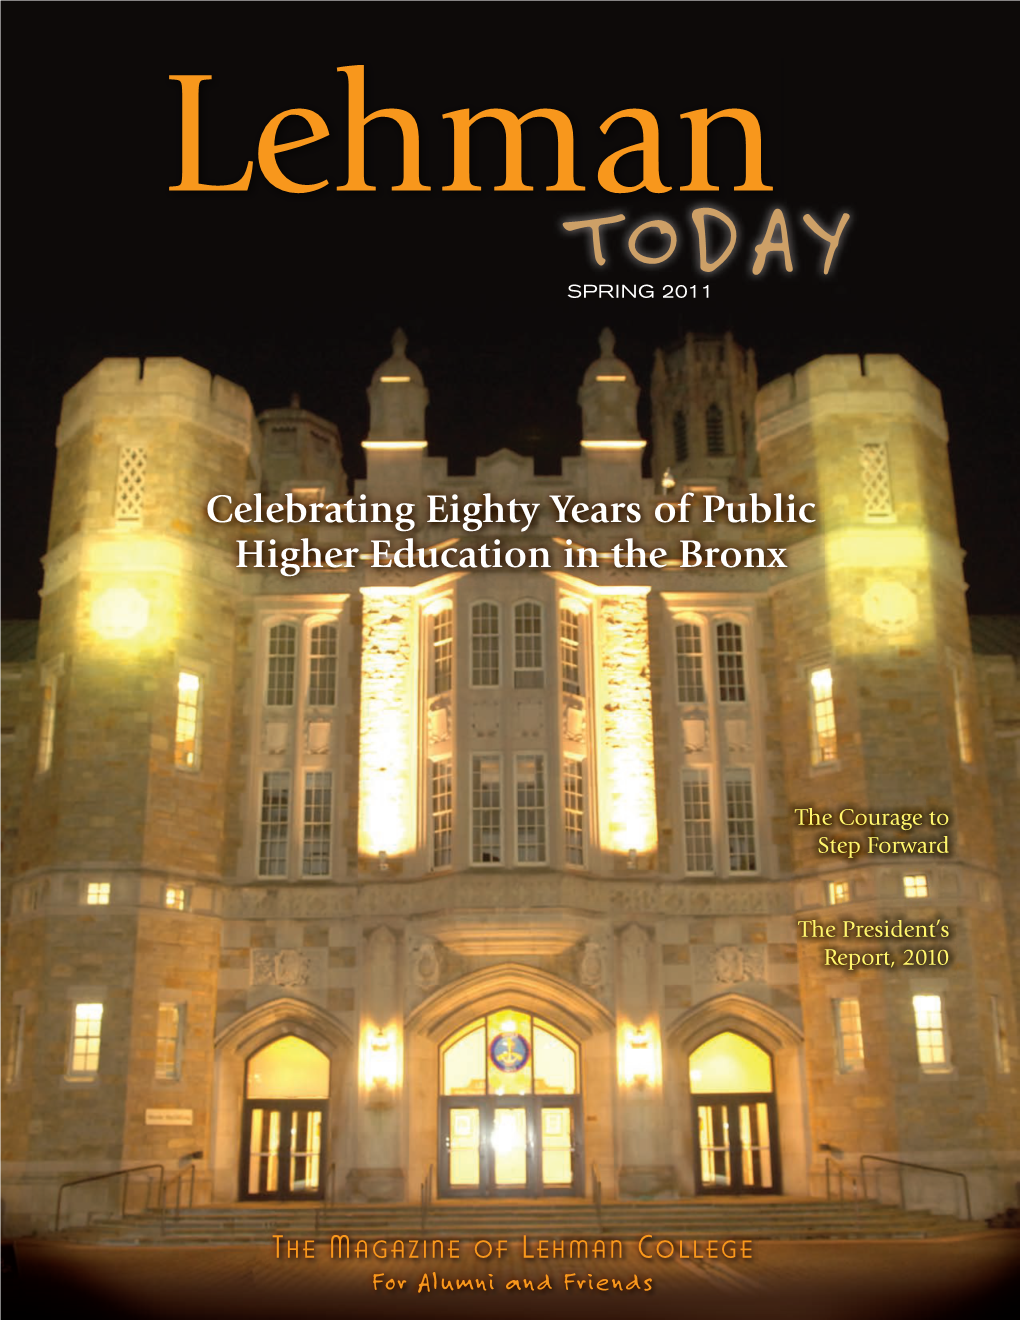 Celebrating Eighty Years of Public Higher Education in the Bronx